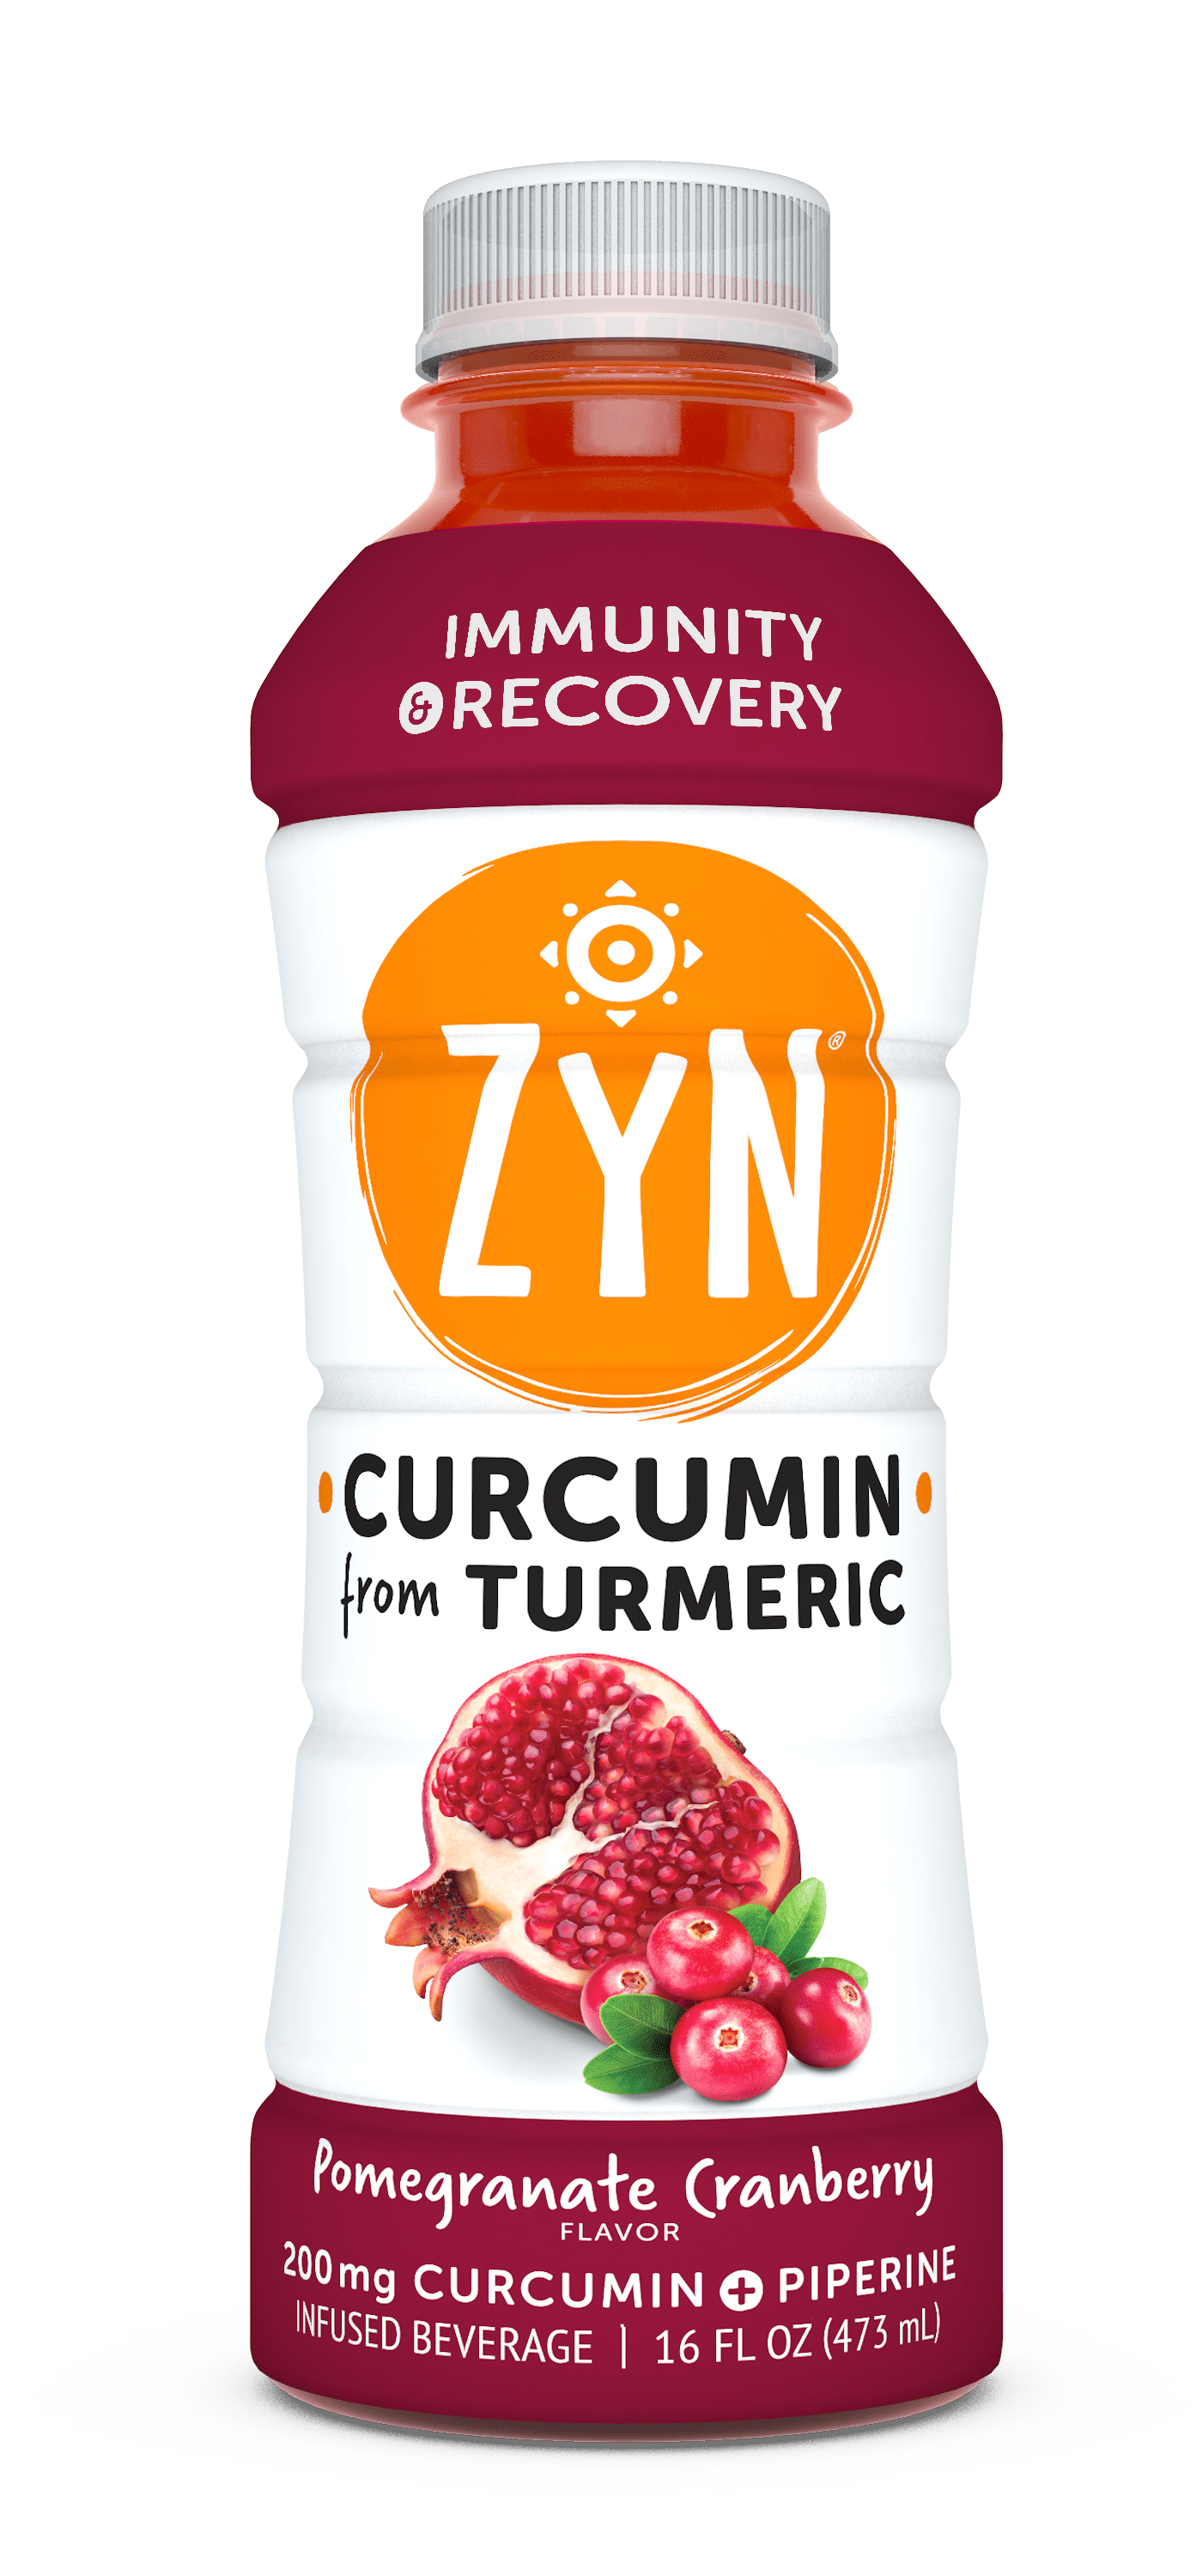 ZYN Immunity & Recovery Drinks - Pomegranate Cranberry Flavor 12 units per case 16.0 fl